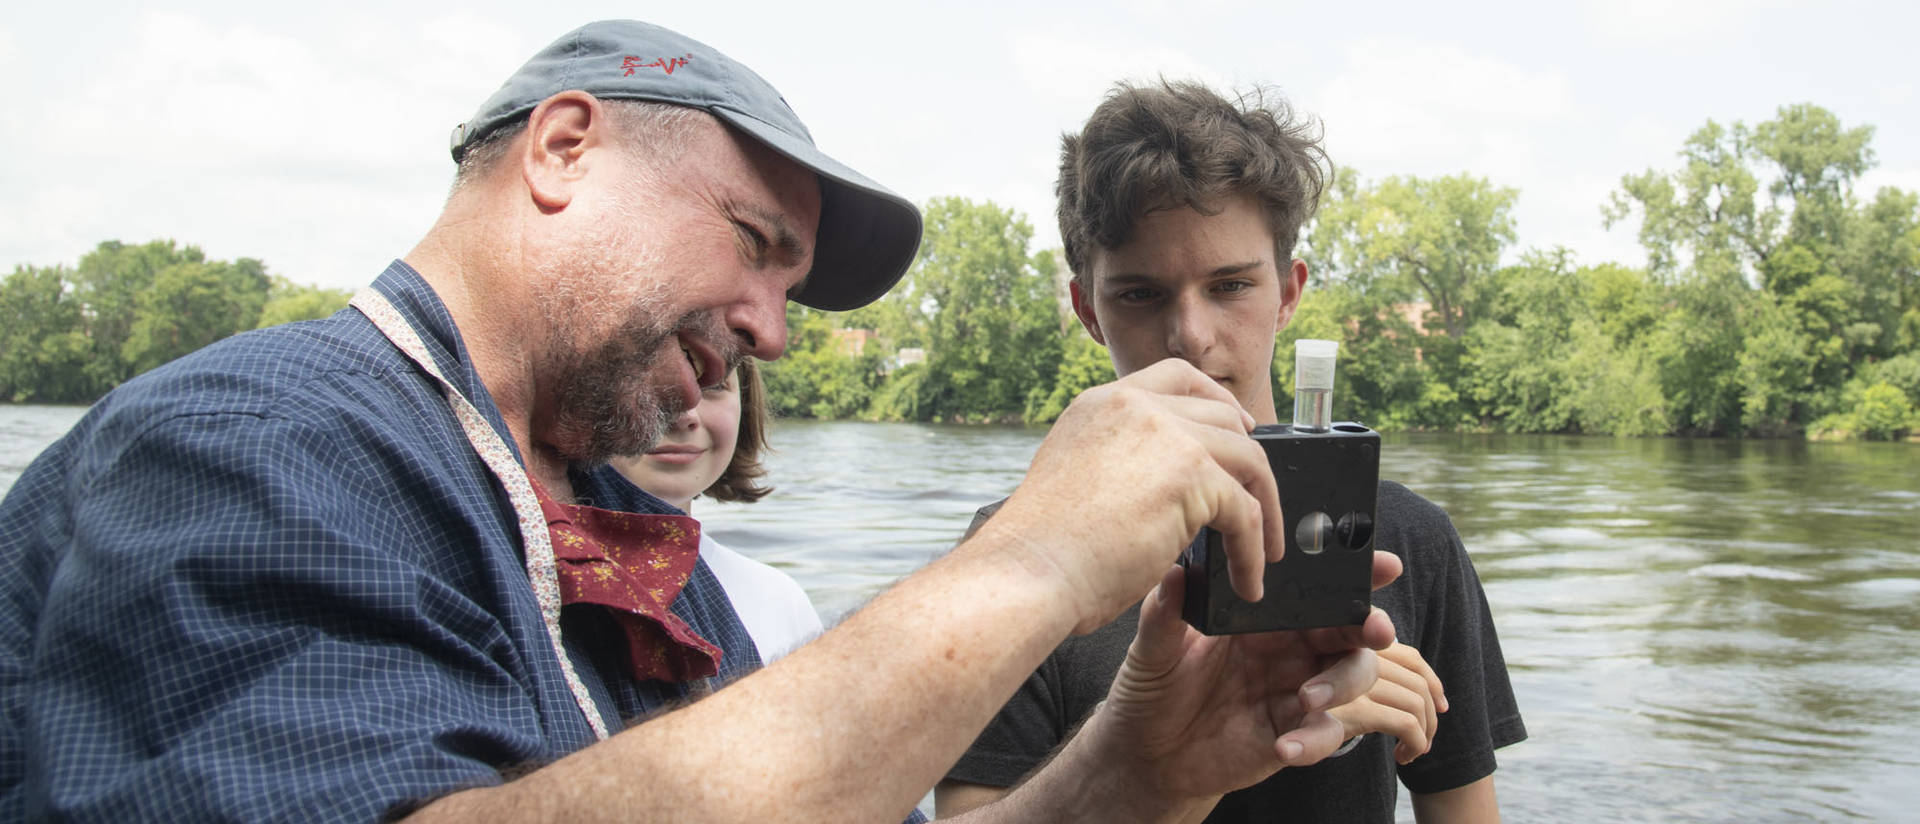 UW-Eau Claire geology professor Dr. J. Brian Mahoney shows high schooler Quinten Anger how to use a colorimetric kit to measure nitrate concentration in the Chippewa River. (Submitted photo)